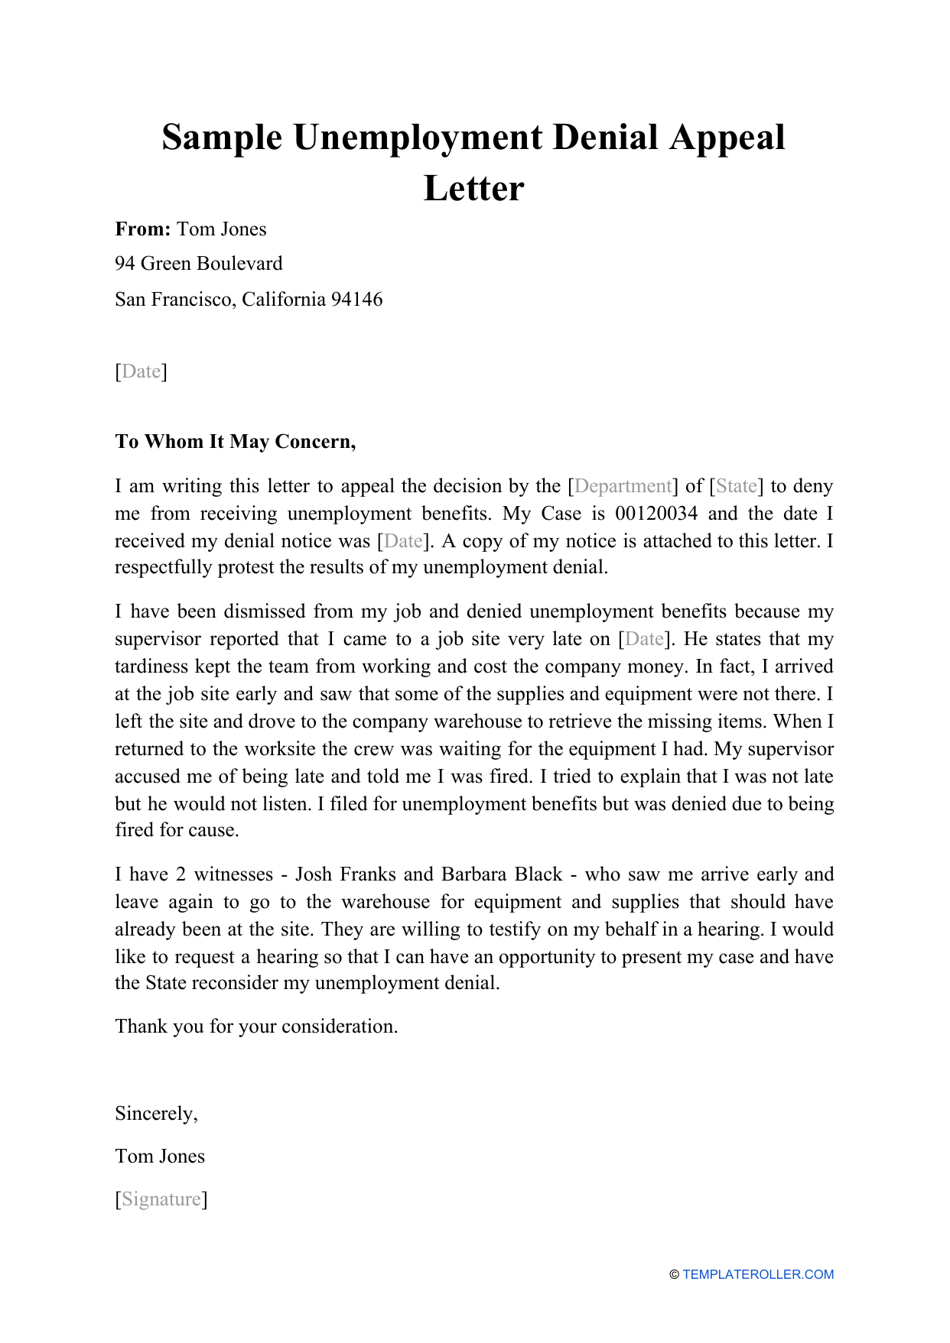 Sample Unemployment Denial Appeal Letter Download Printable PDF In Insurance Denial Appeal Letter Template